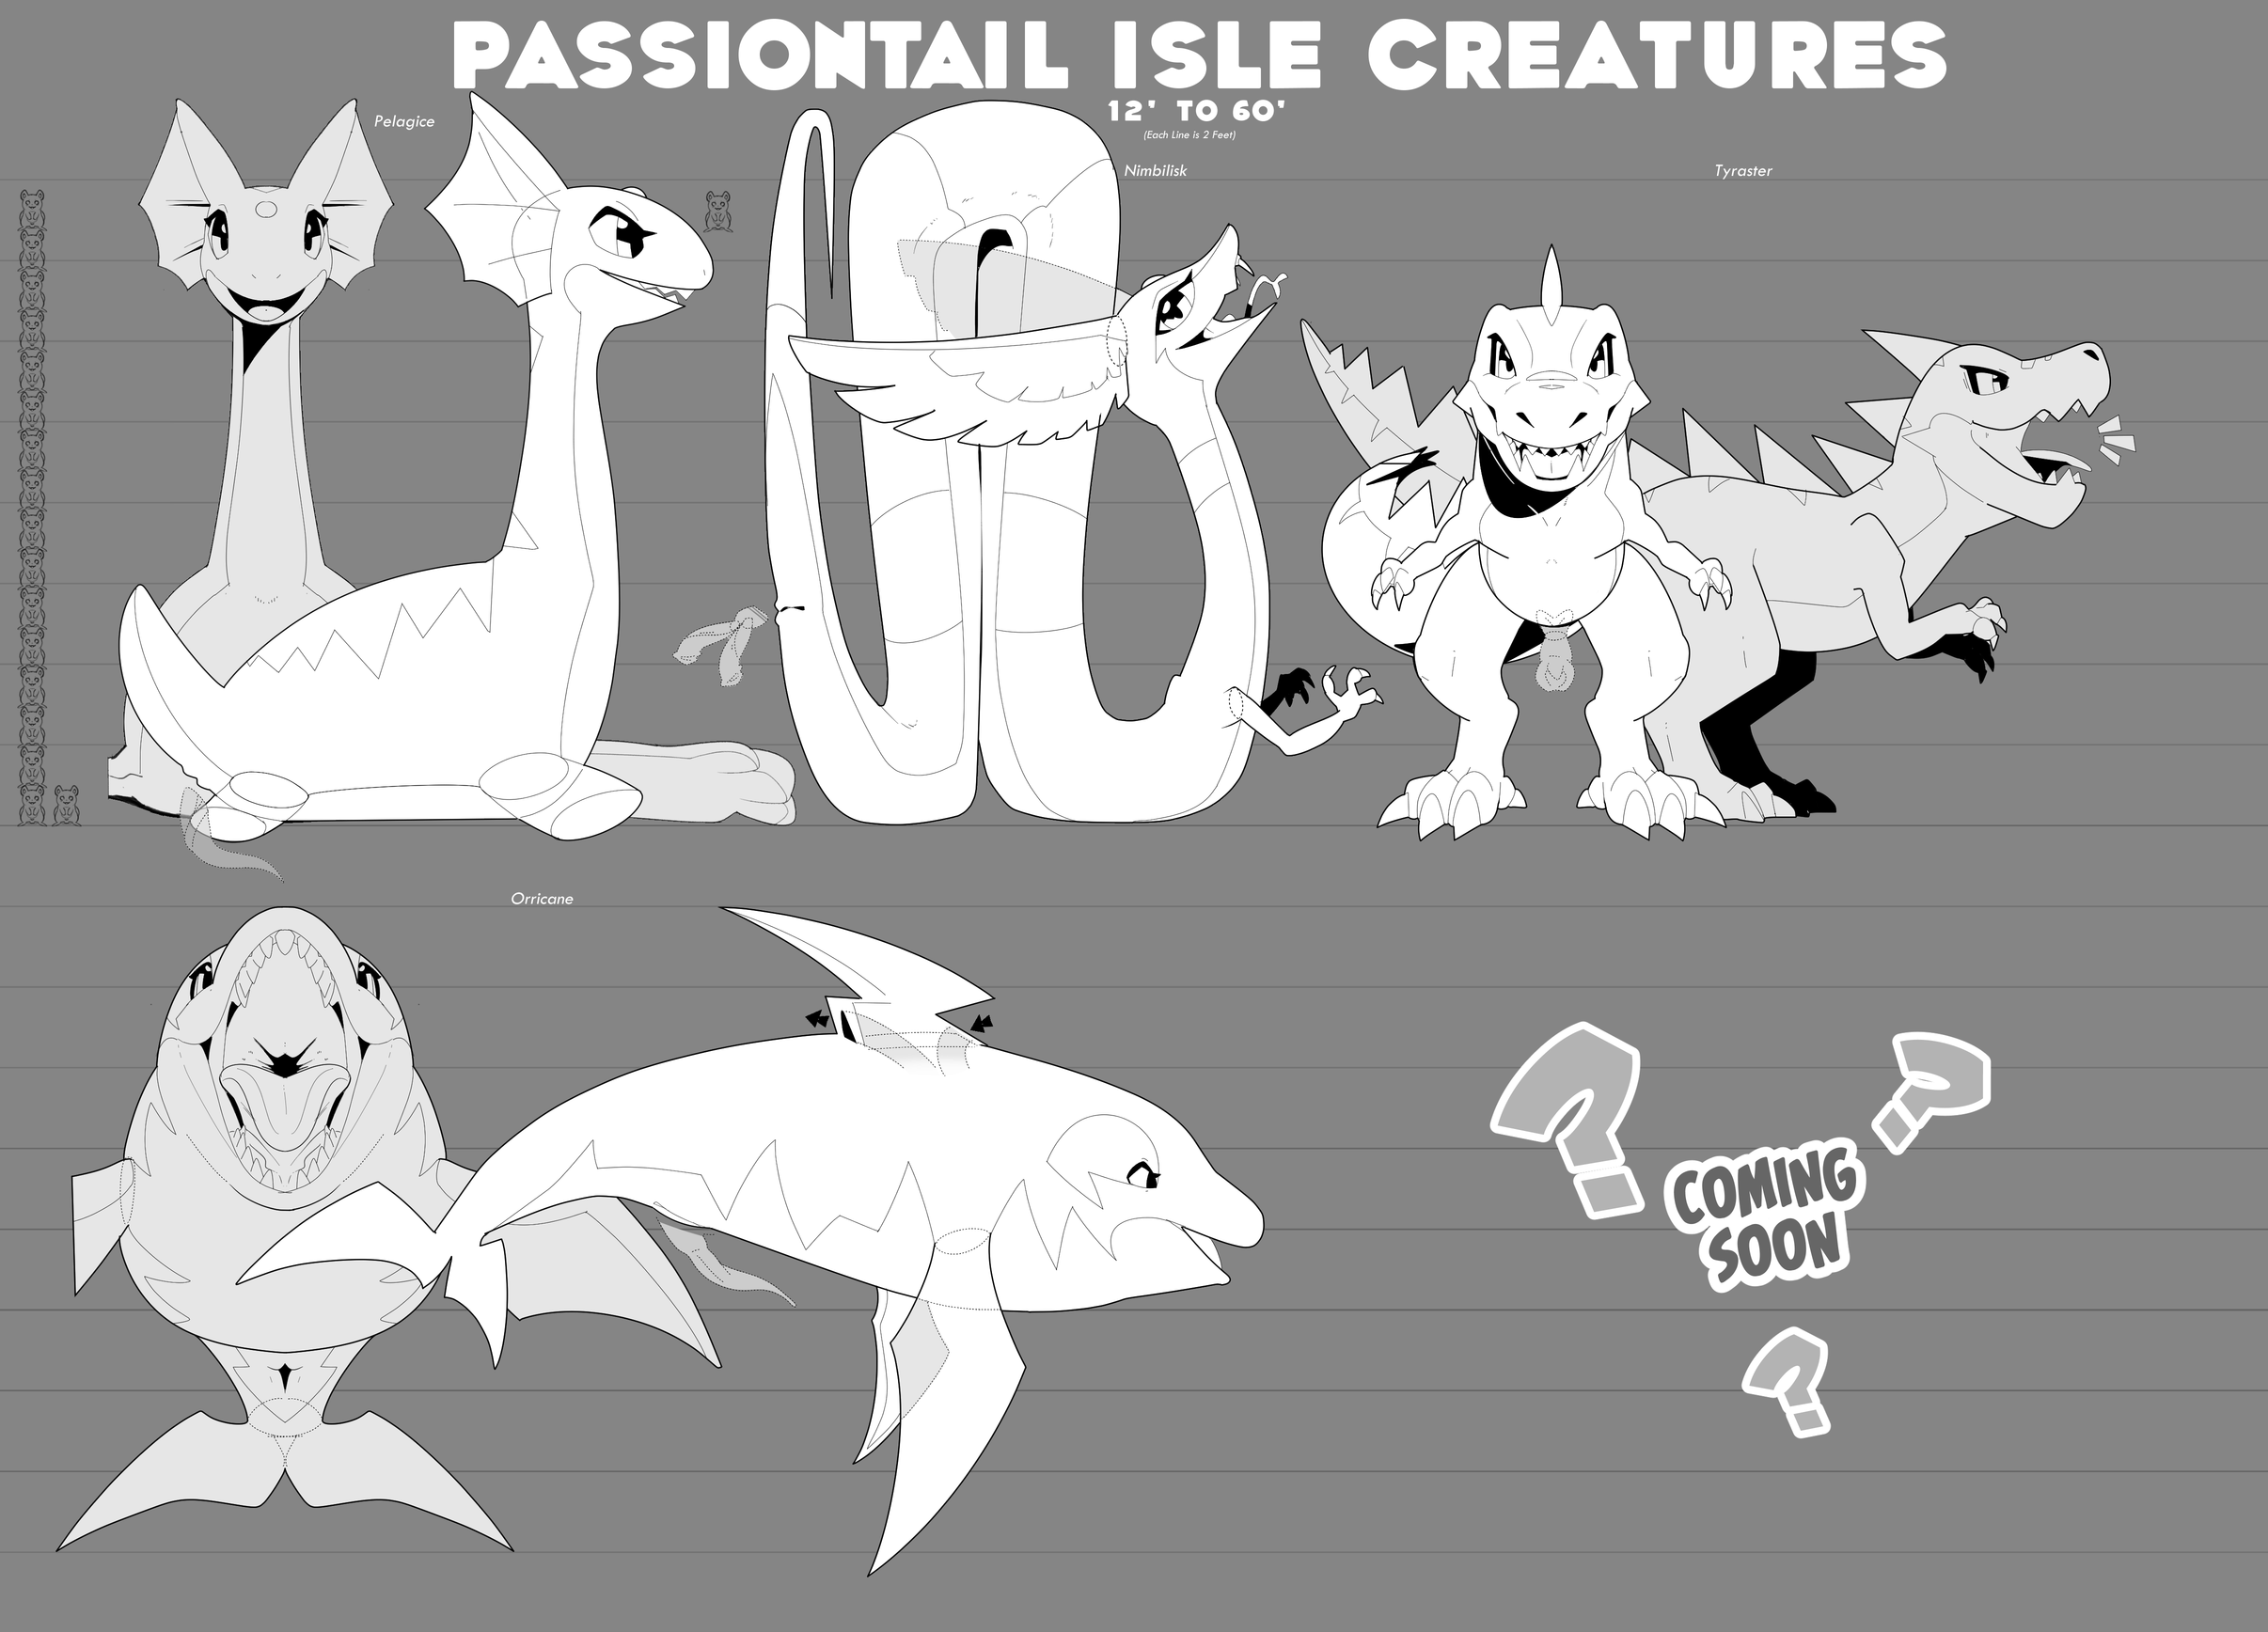 Passiontail isle